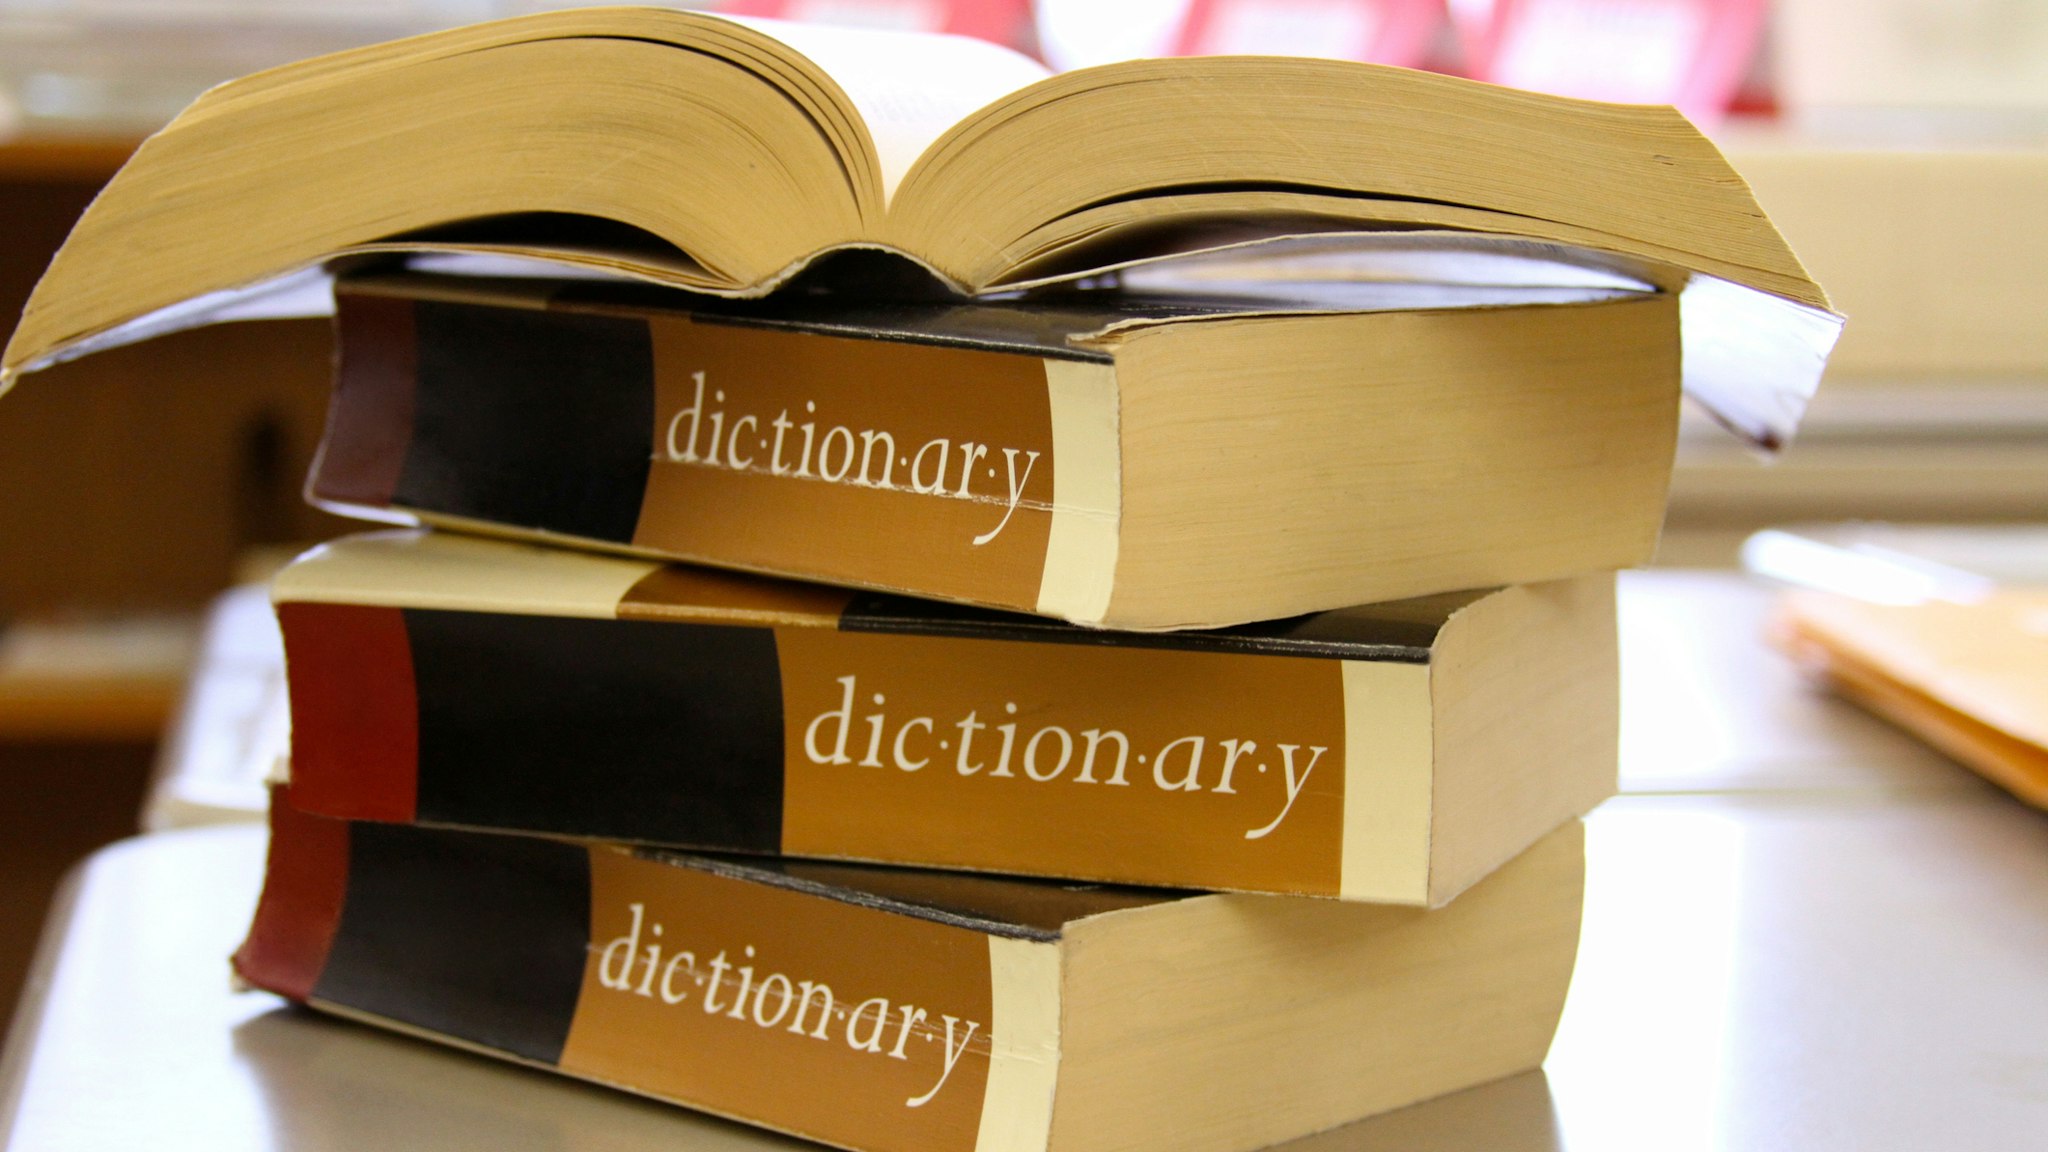 Stack of dictionaries on a desk - stock photo